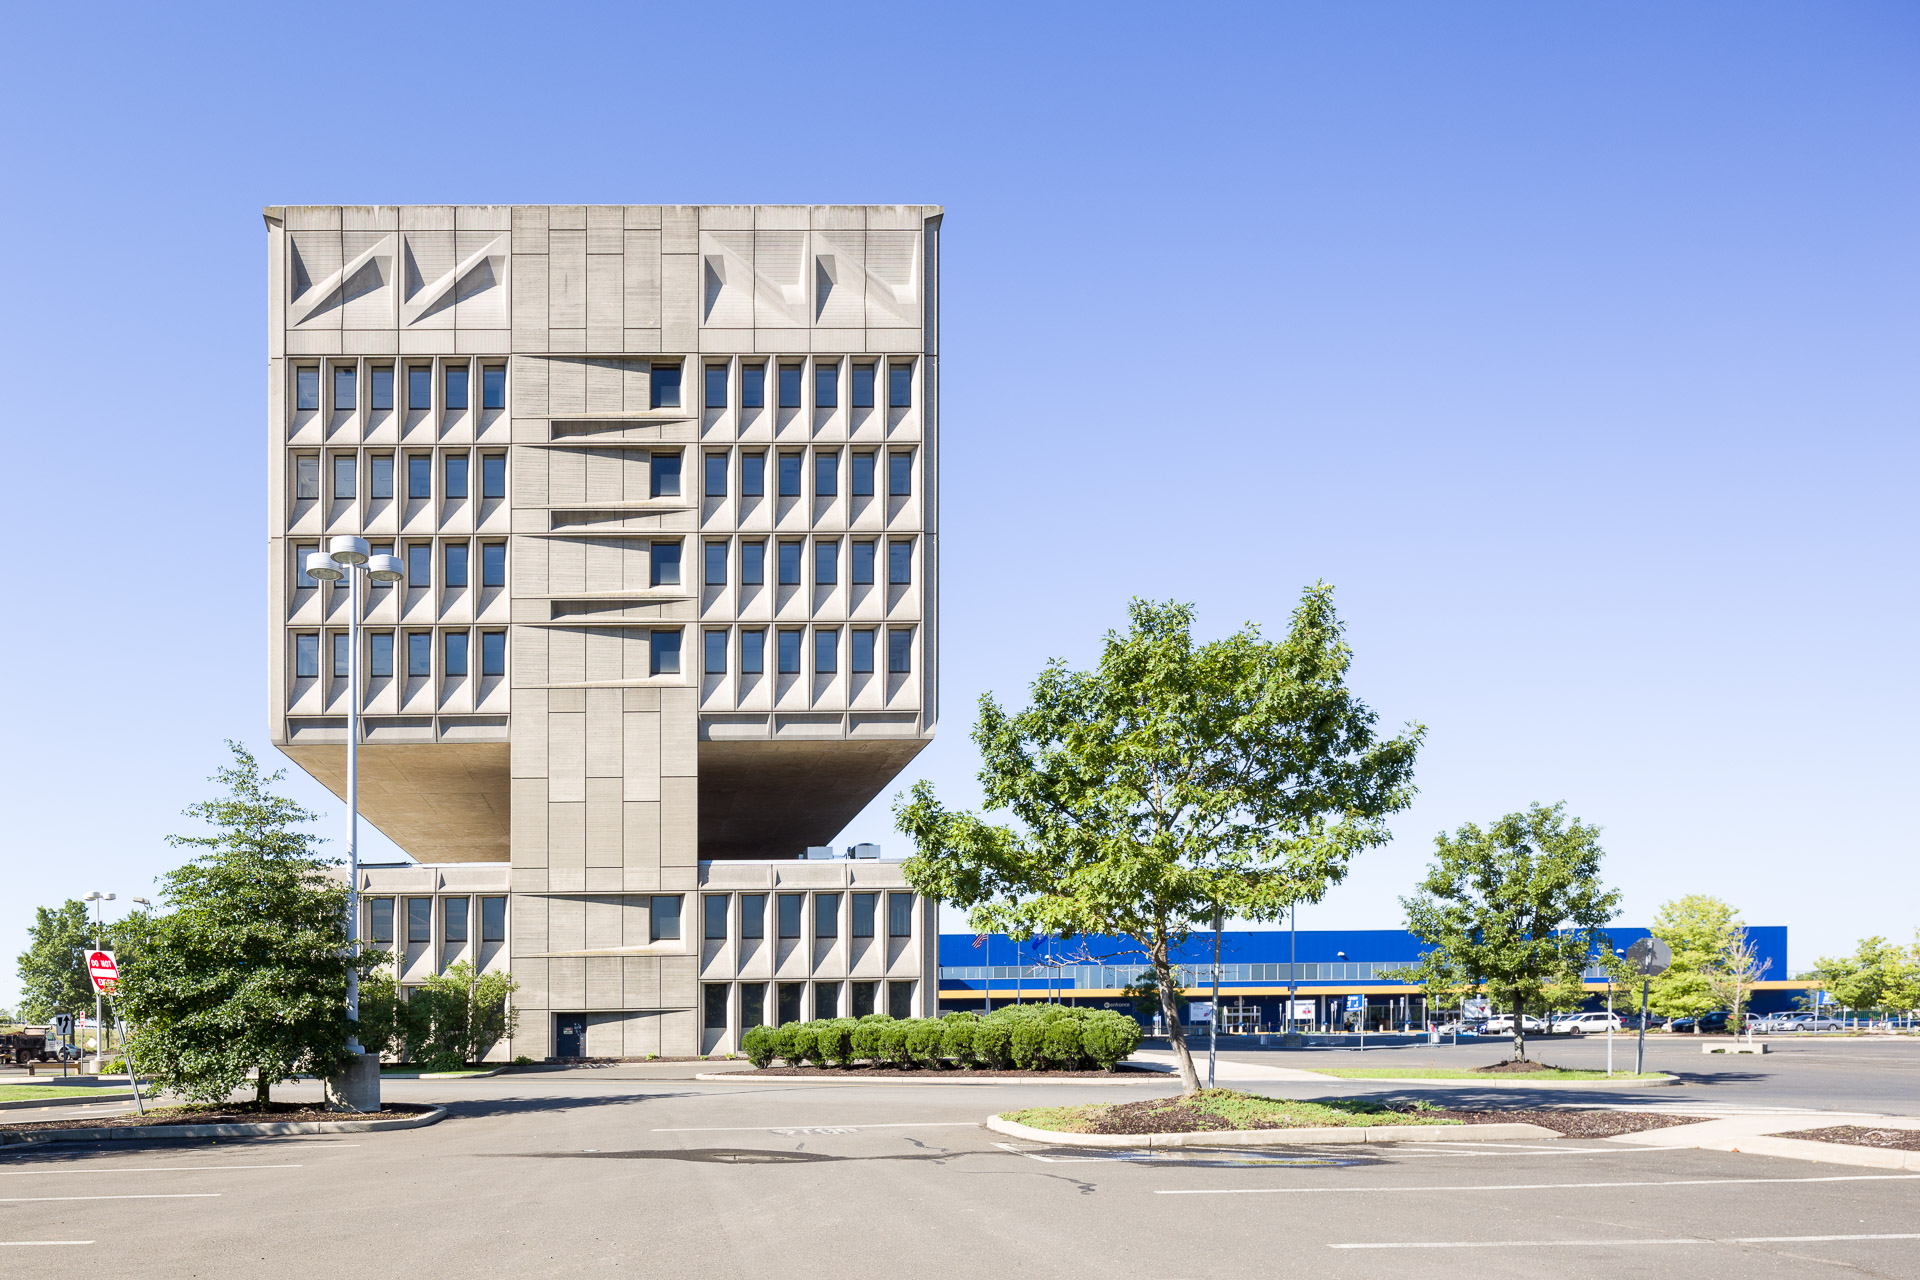 Armstrong Rubber Co. in New Haven, CT by Marcel Breuer. Photo by Jason R. Woods.